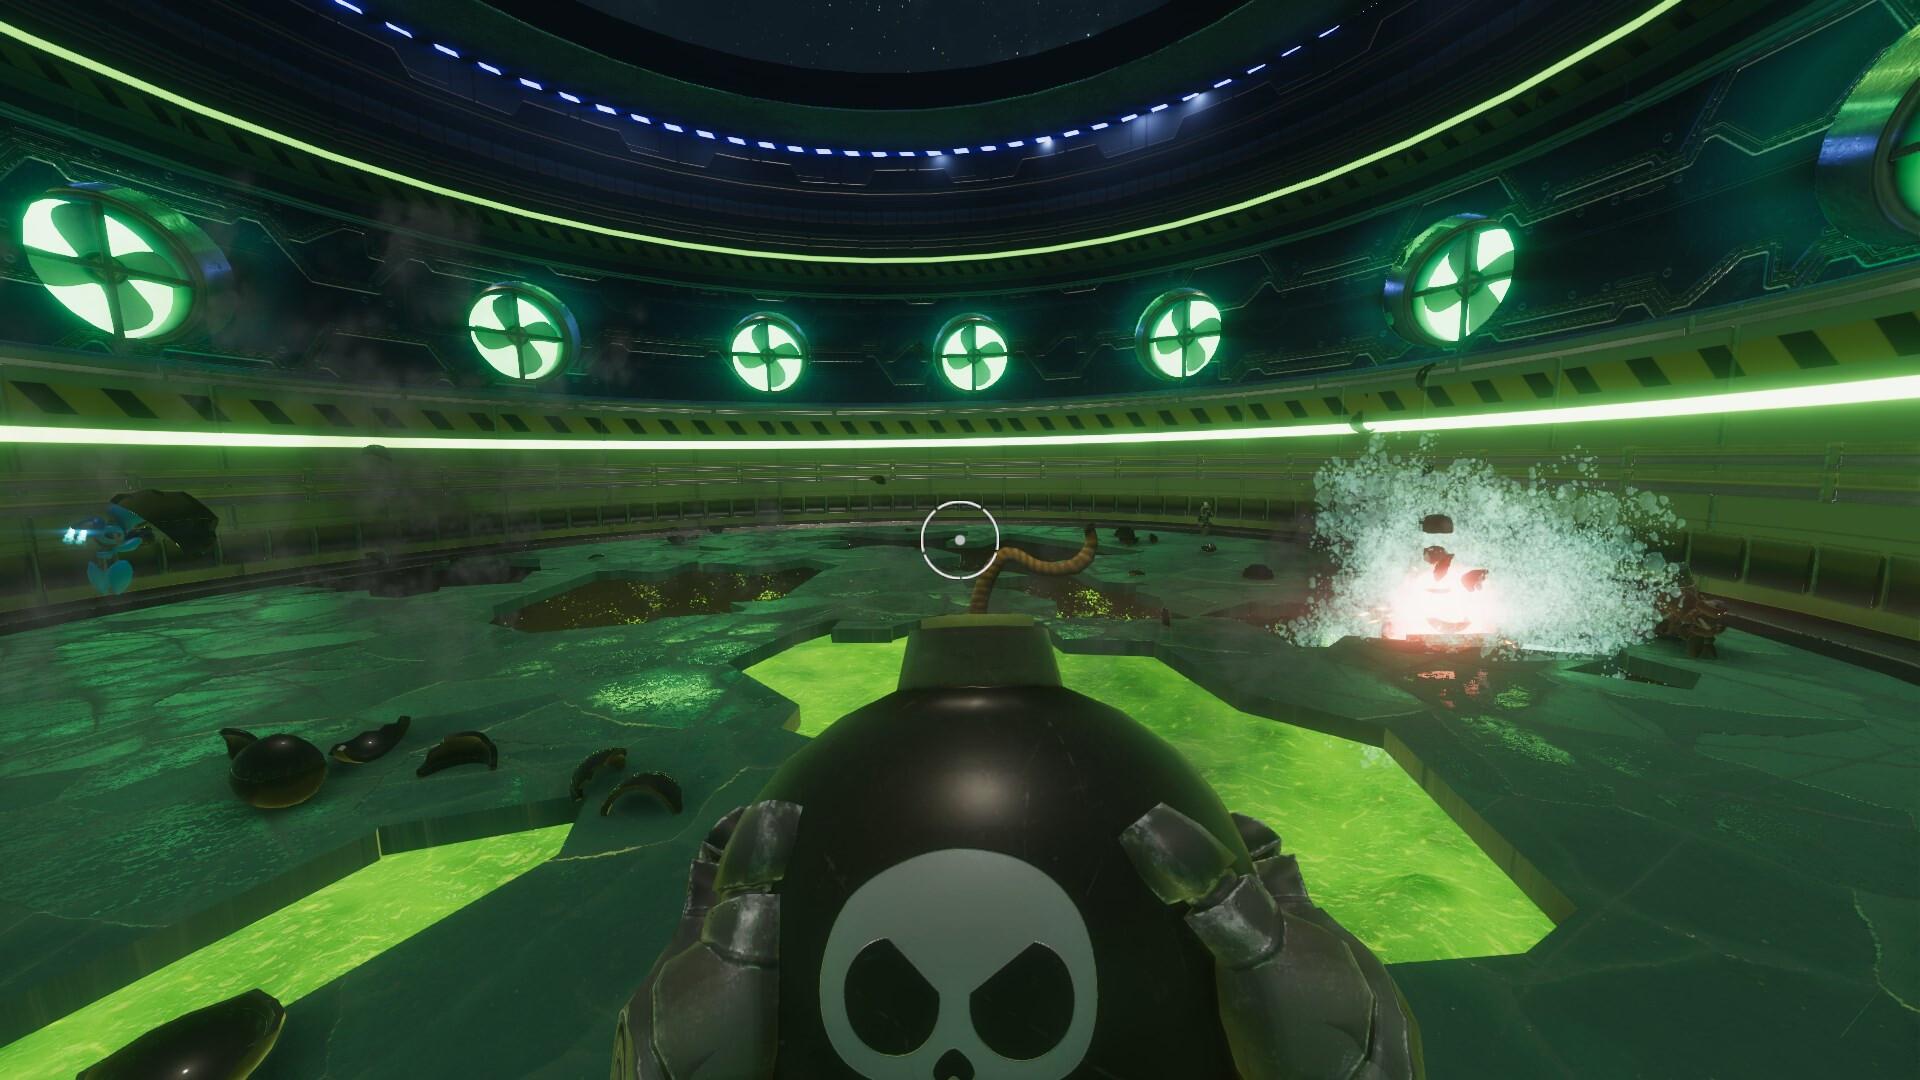 Screenshot №3 from game MicroWorks